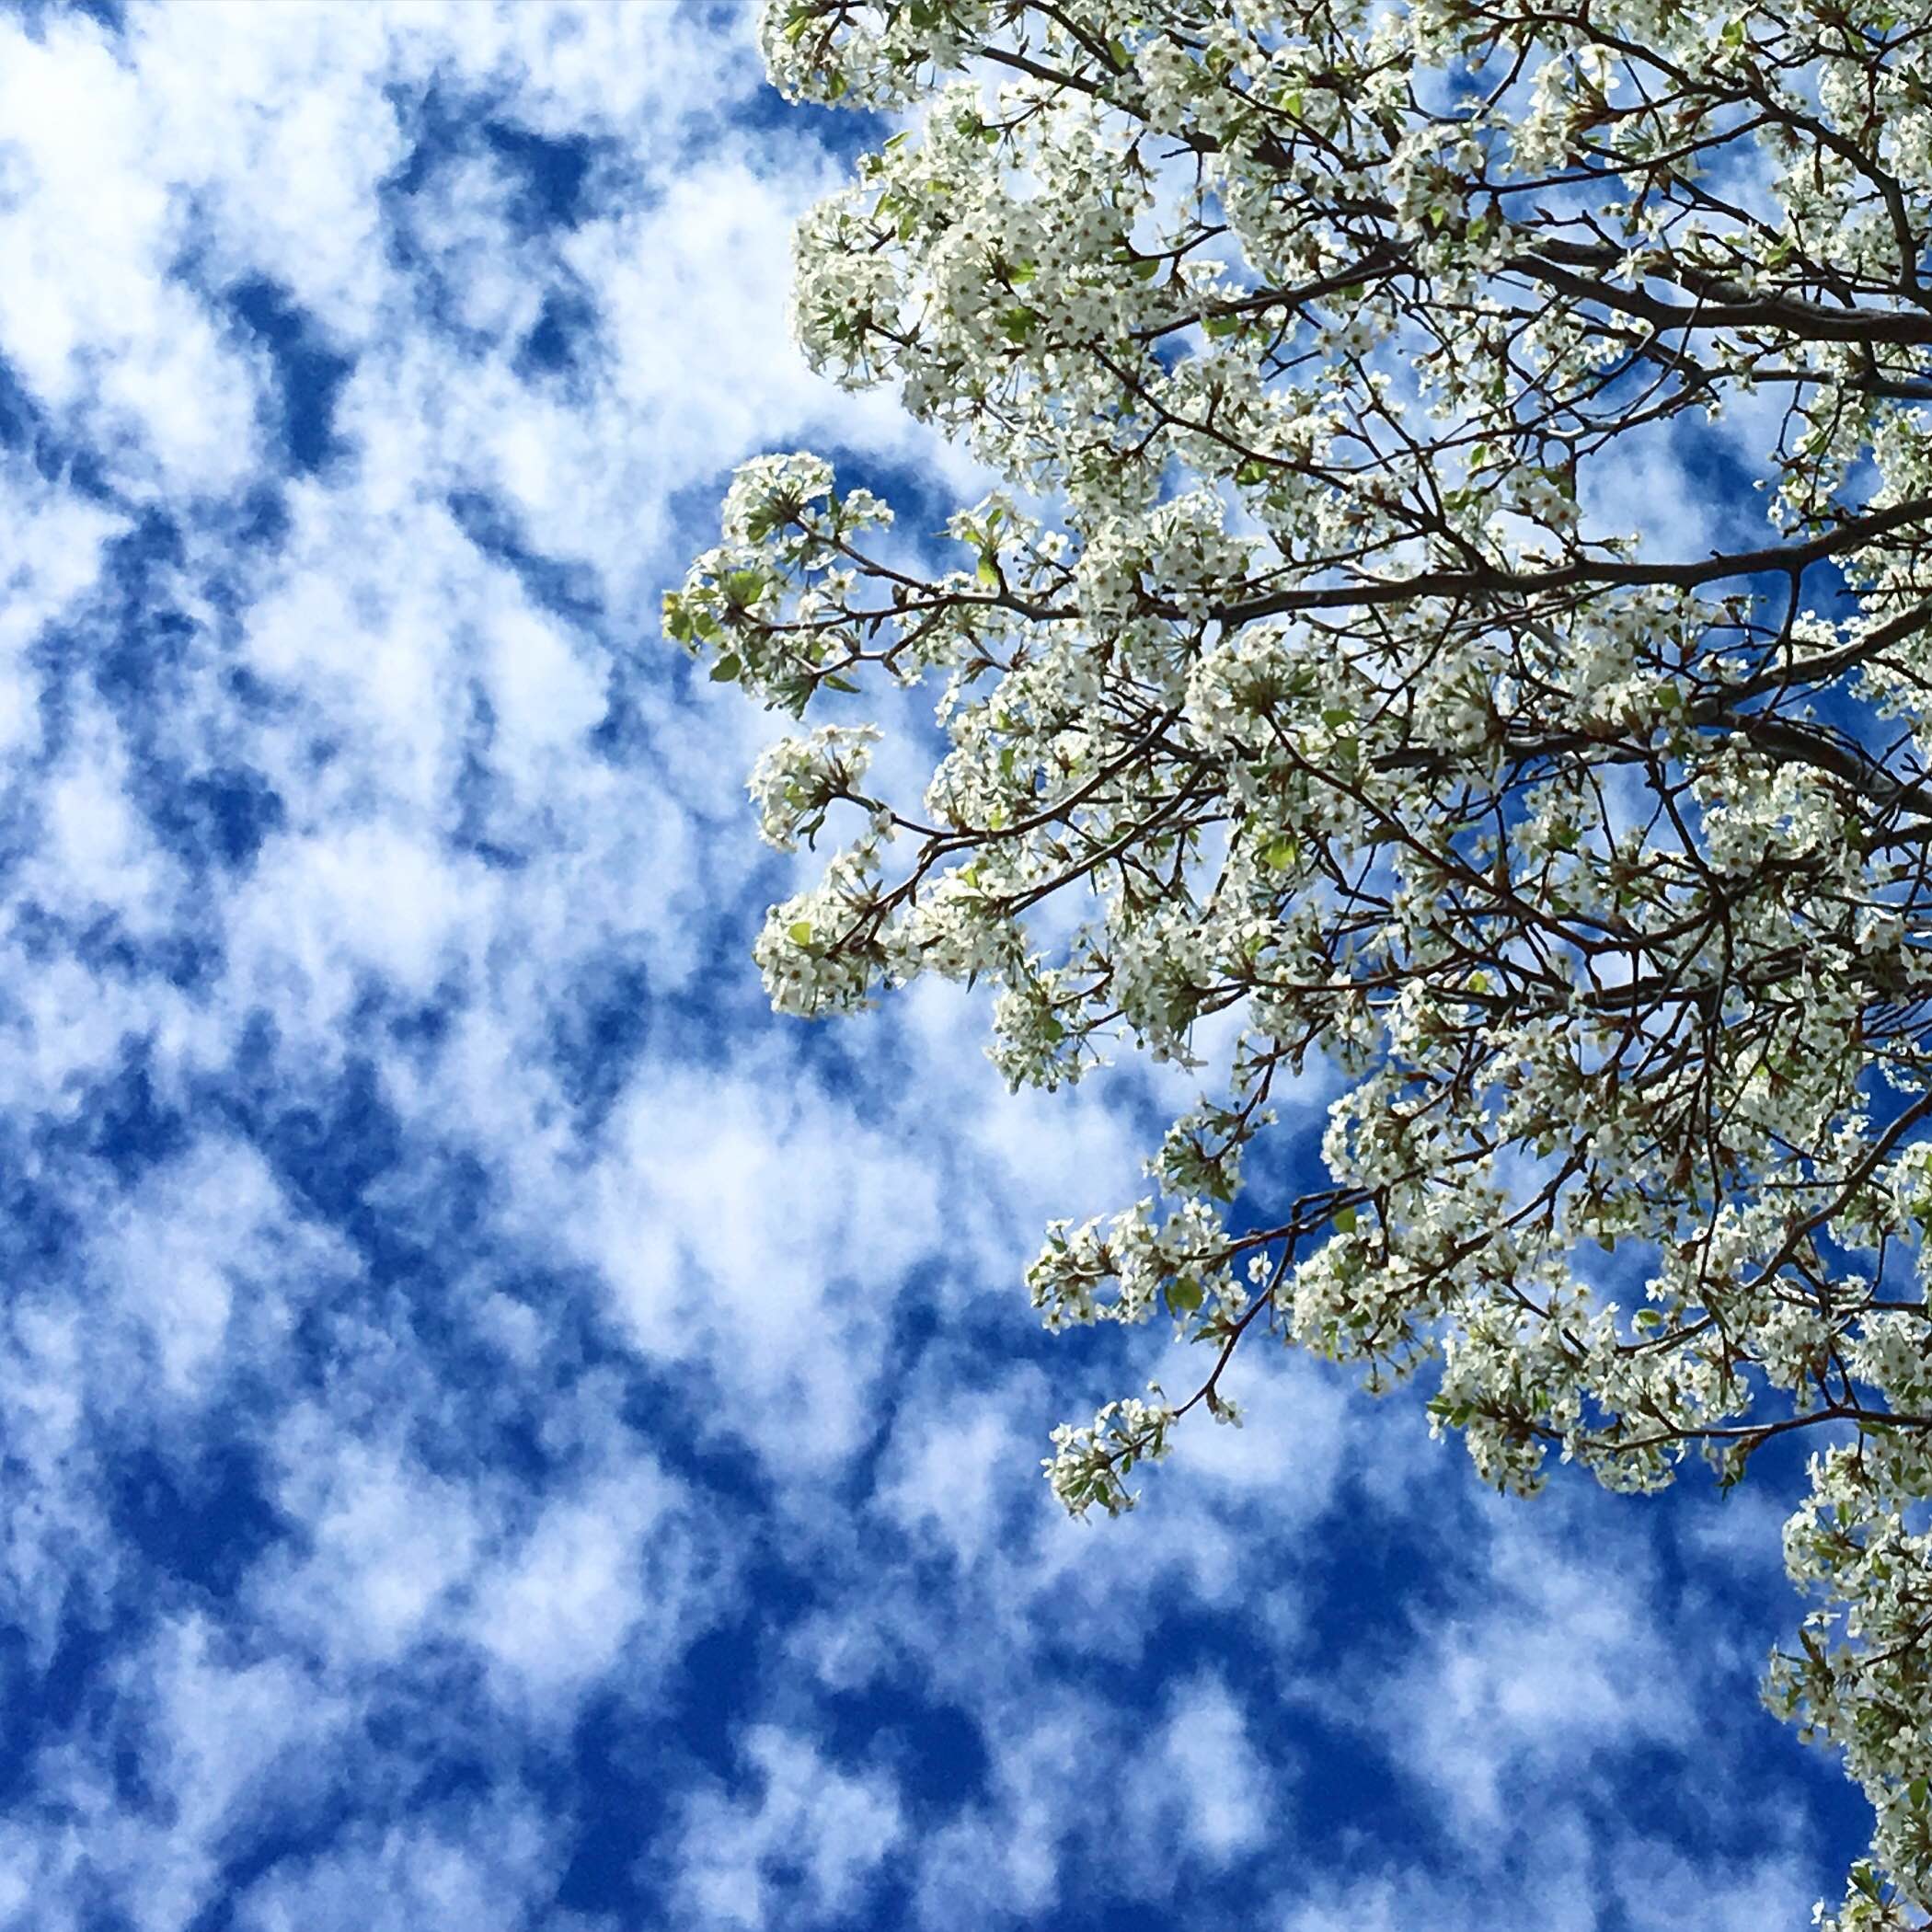 Spring Blossoms and Blue Skies